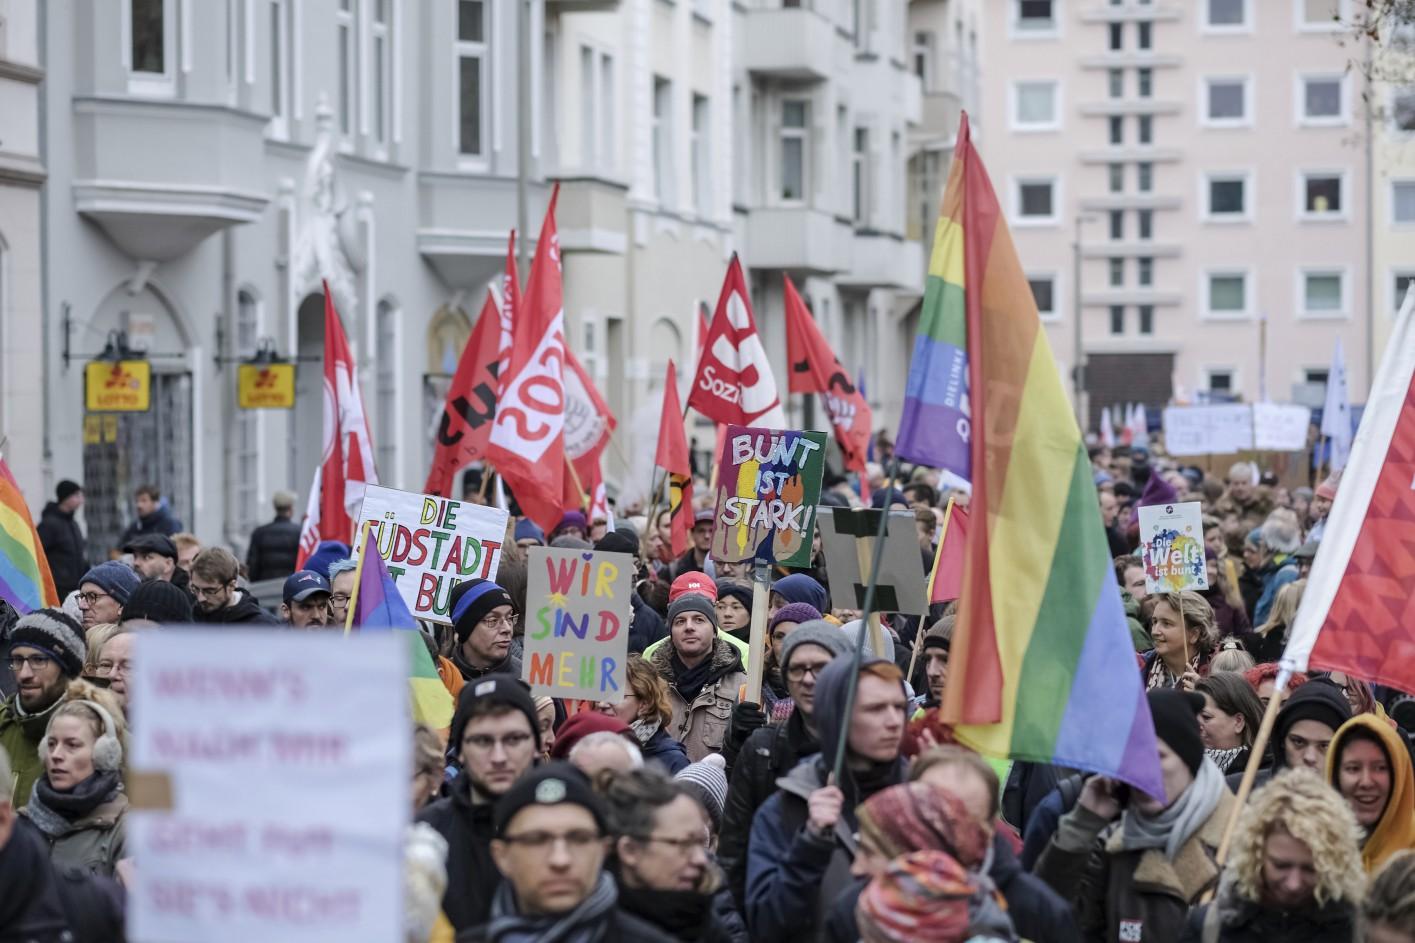 100 far-right protesters confronted by 5,000 counter demonstrators in Germany